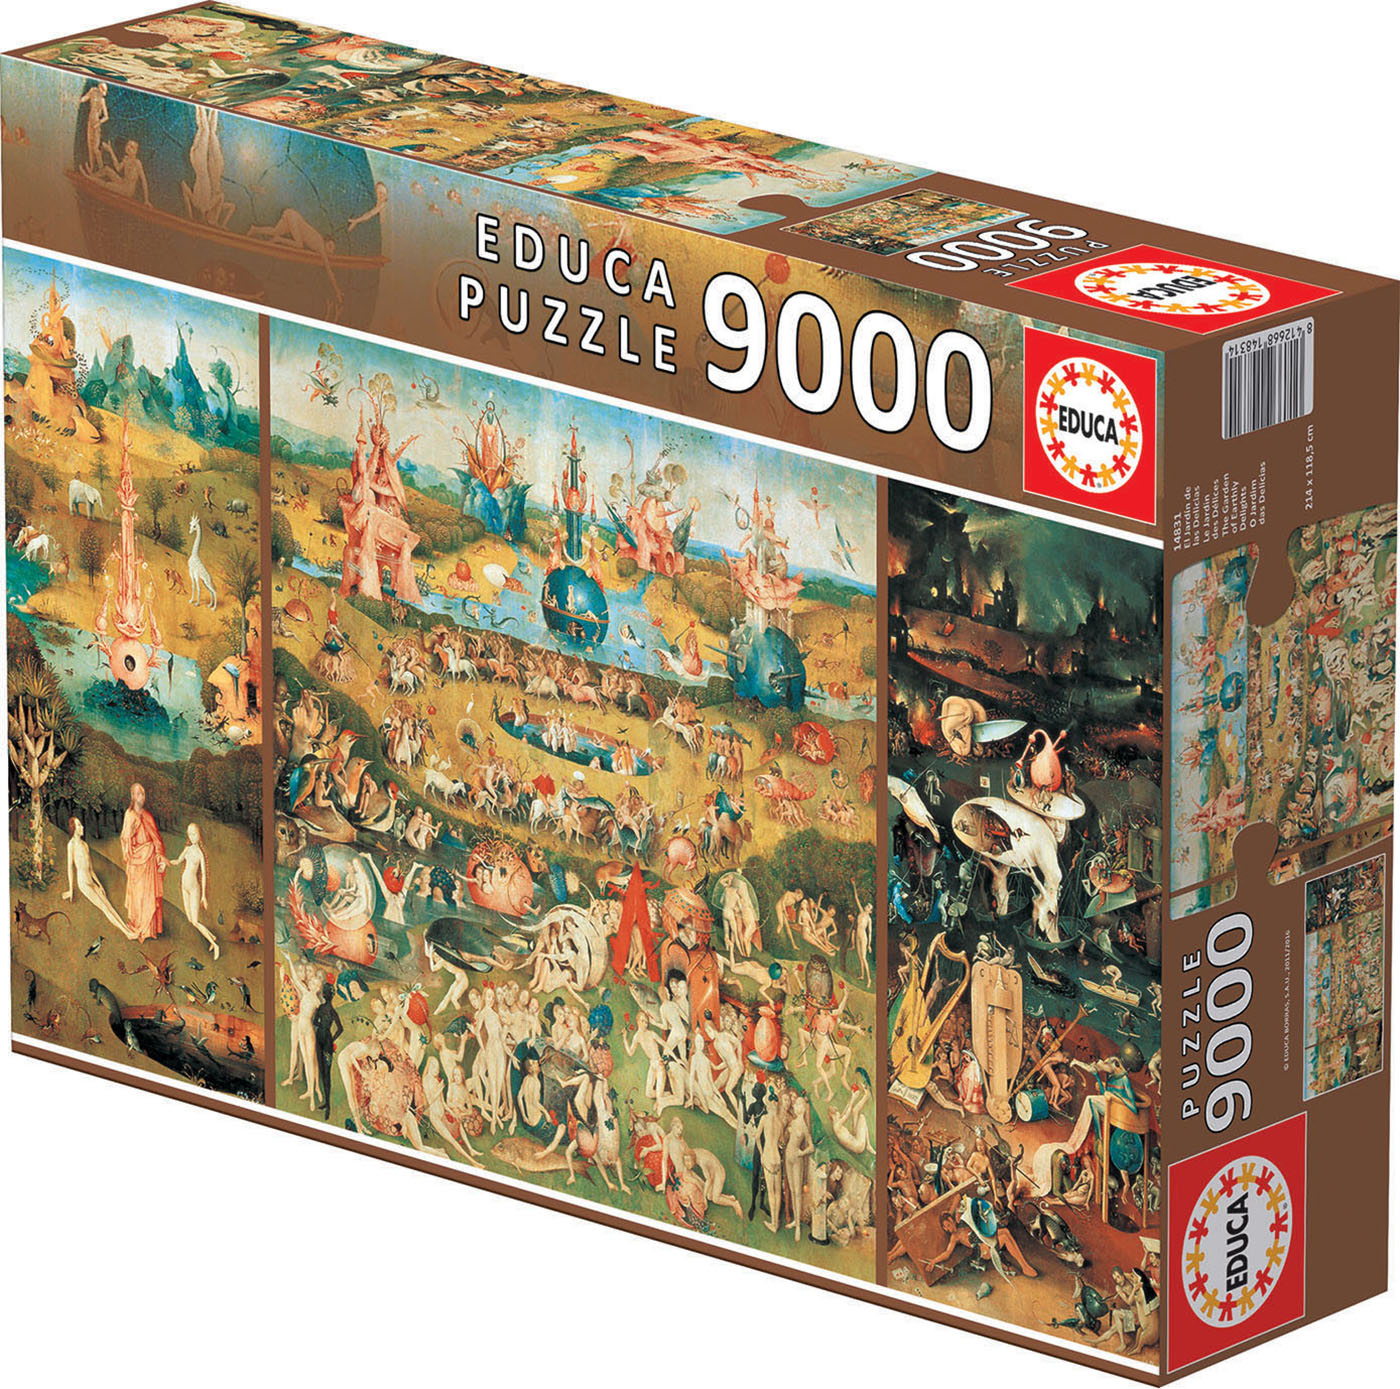 9000 The garden of earthly delights